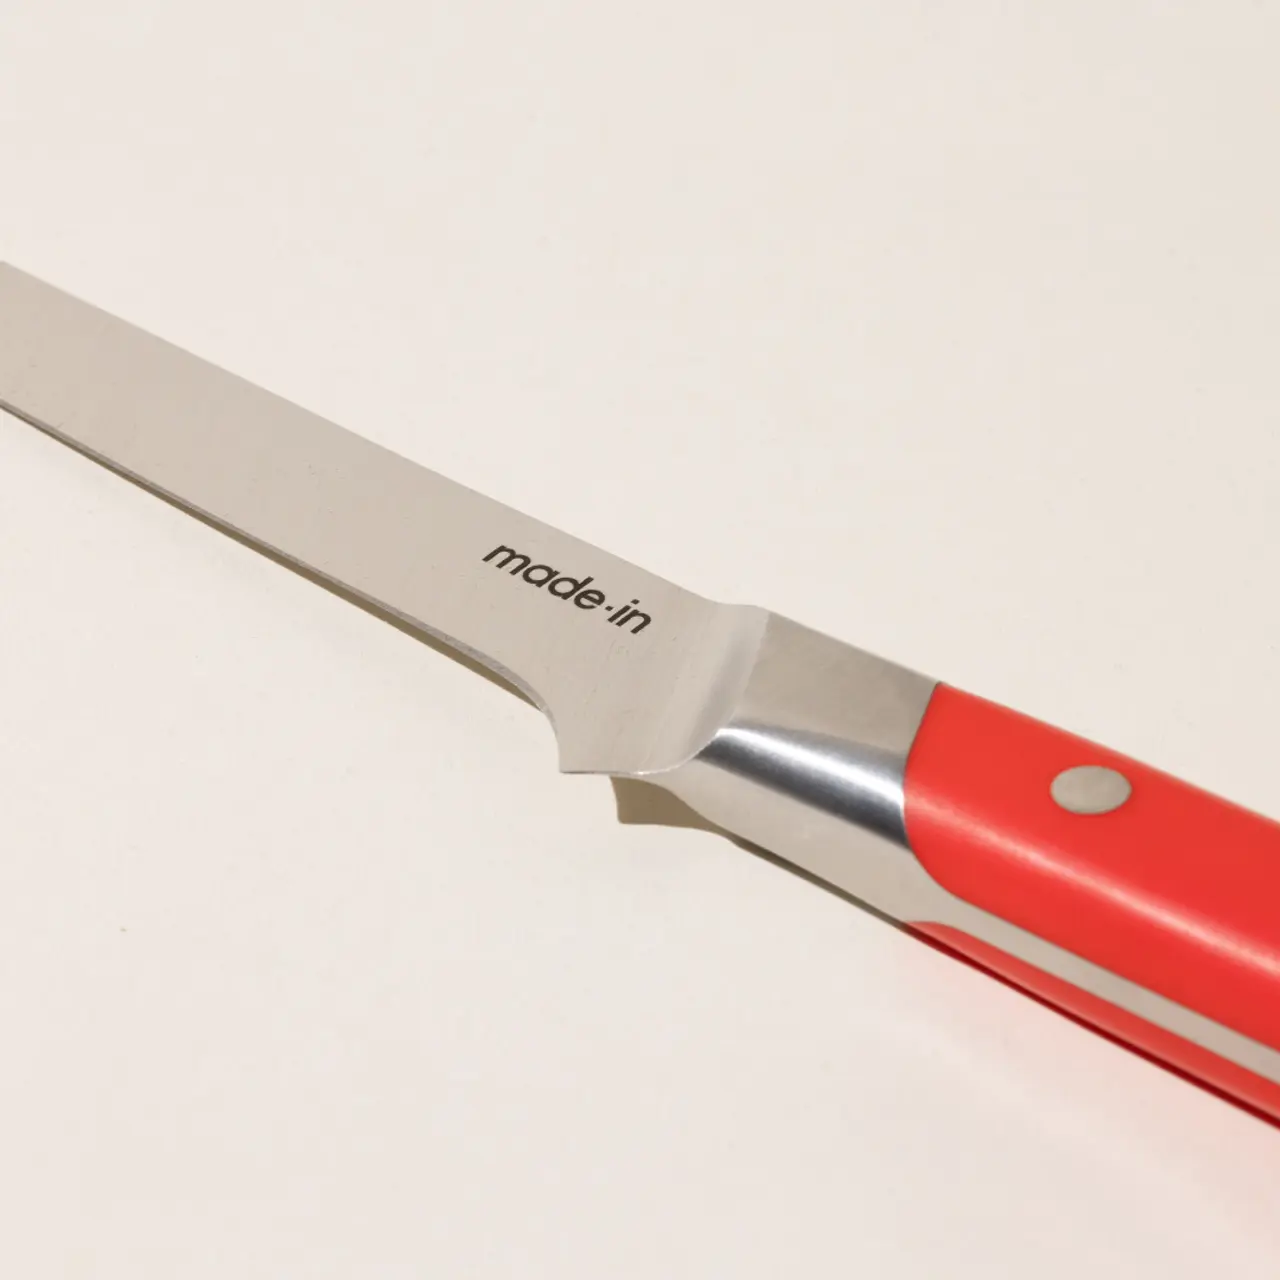 A close-up view of a kitchen knife with a red handle and "made in" engraved on the blade.